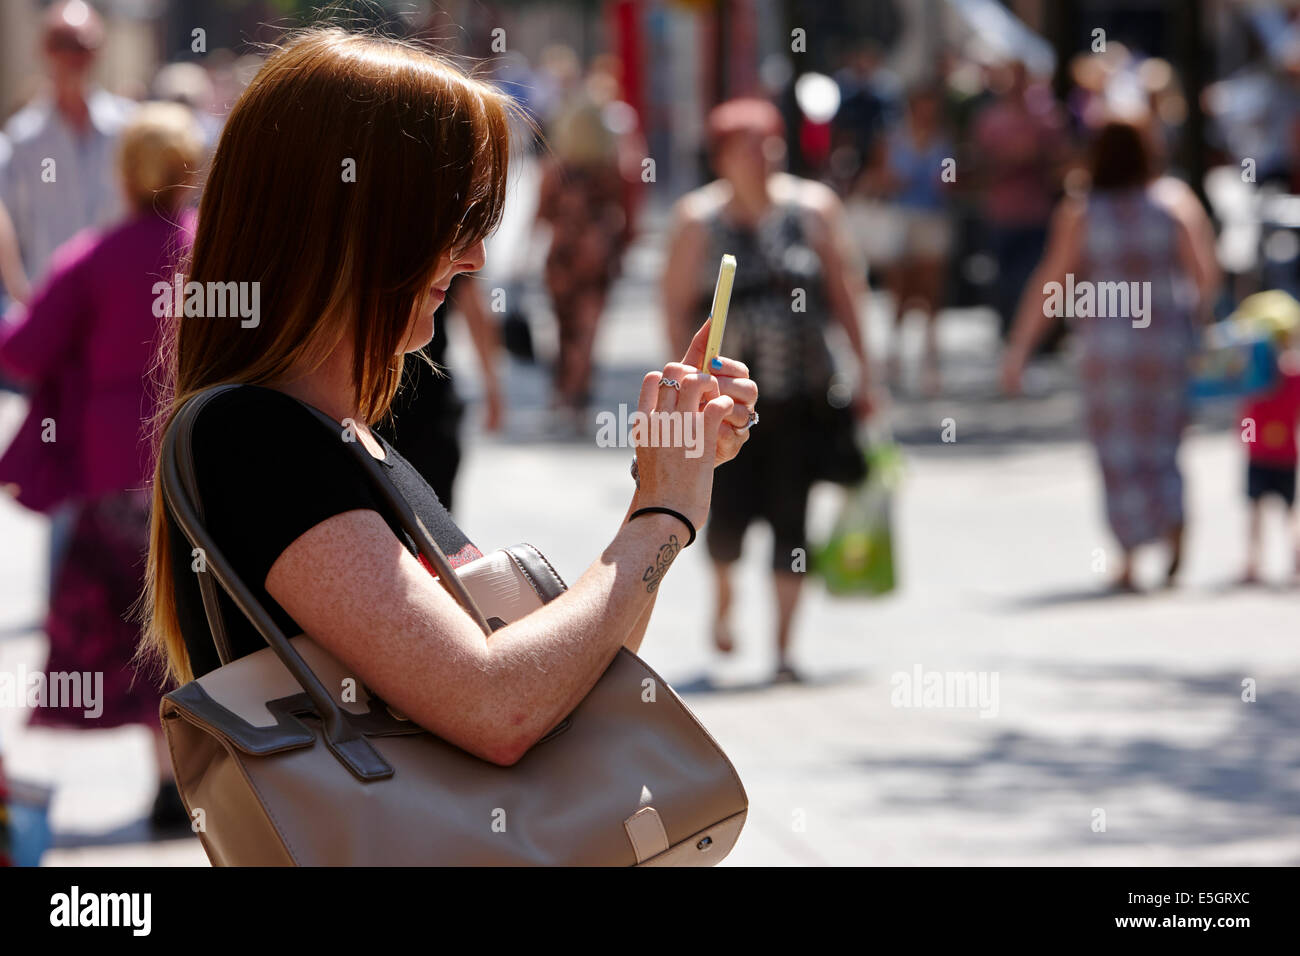 woman using smartphone to take a photo or text in Belfast city centre Stock Photo